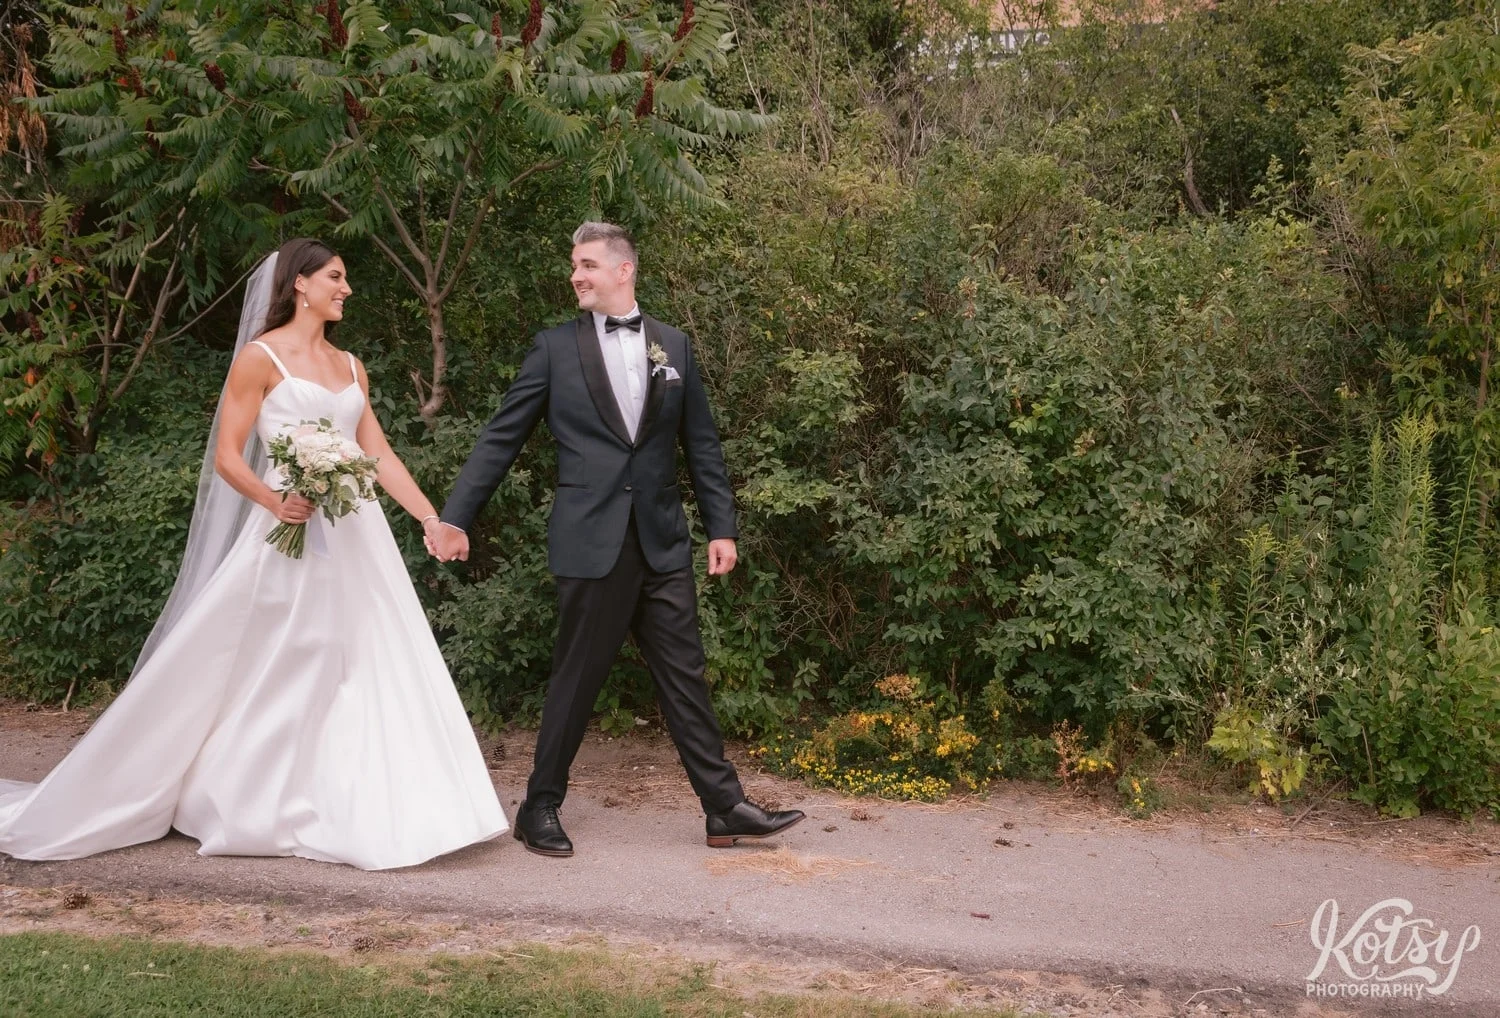 A wide shot of a groom walking with his bride while holding her hand. Photographed at Hunter's Point Wildlife Park in Toronto, Ontario, Canada